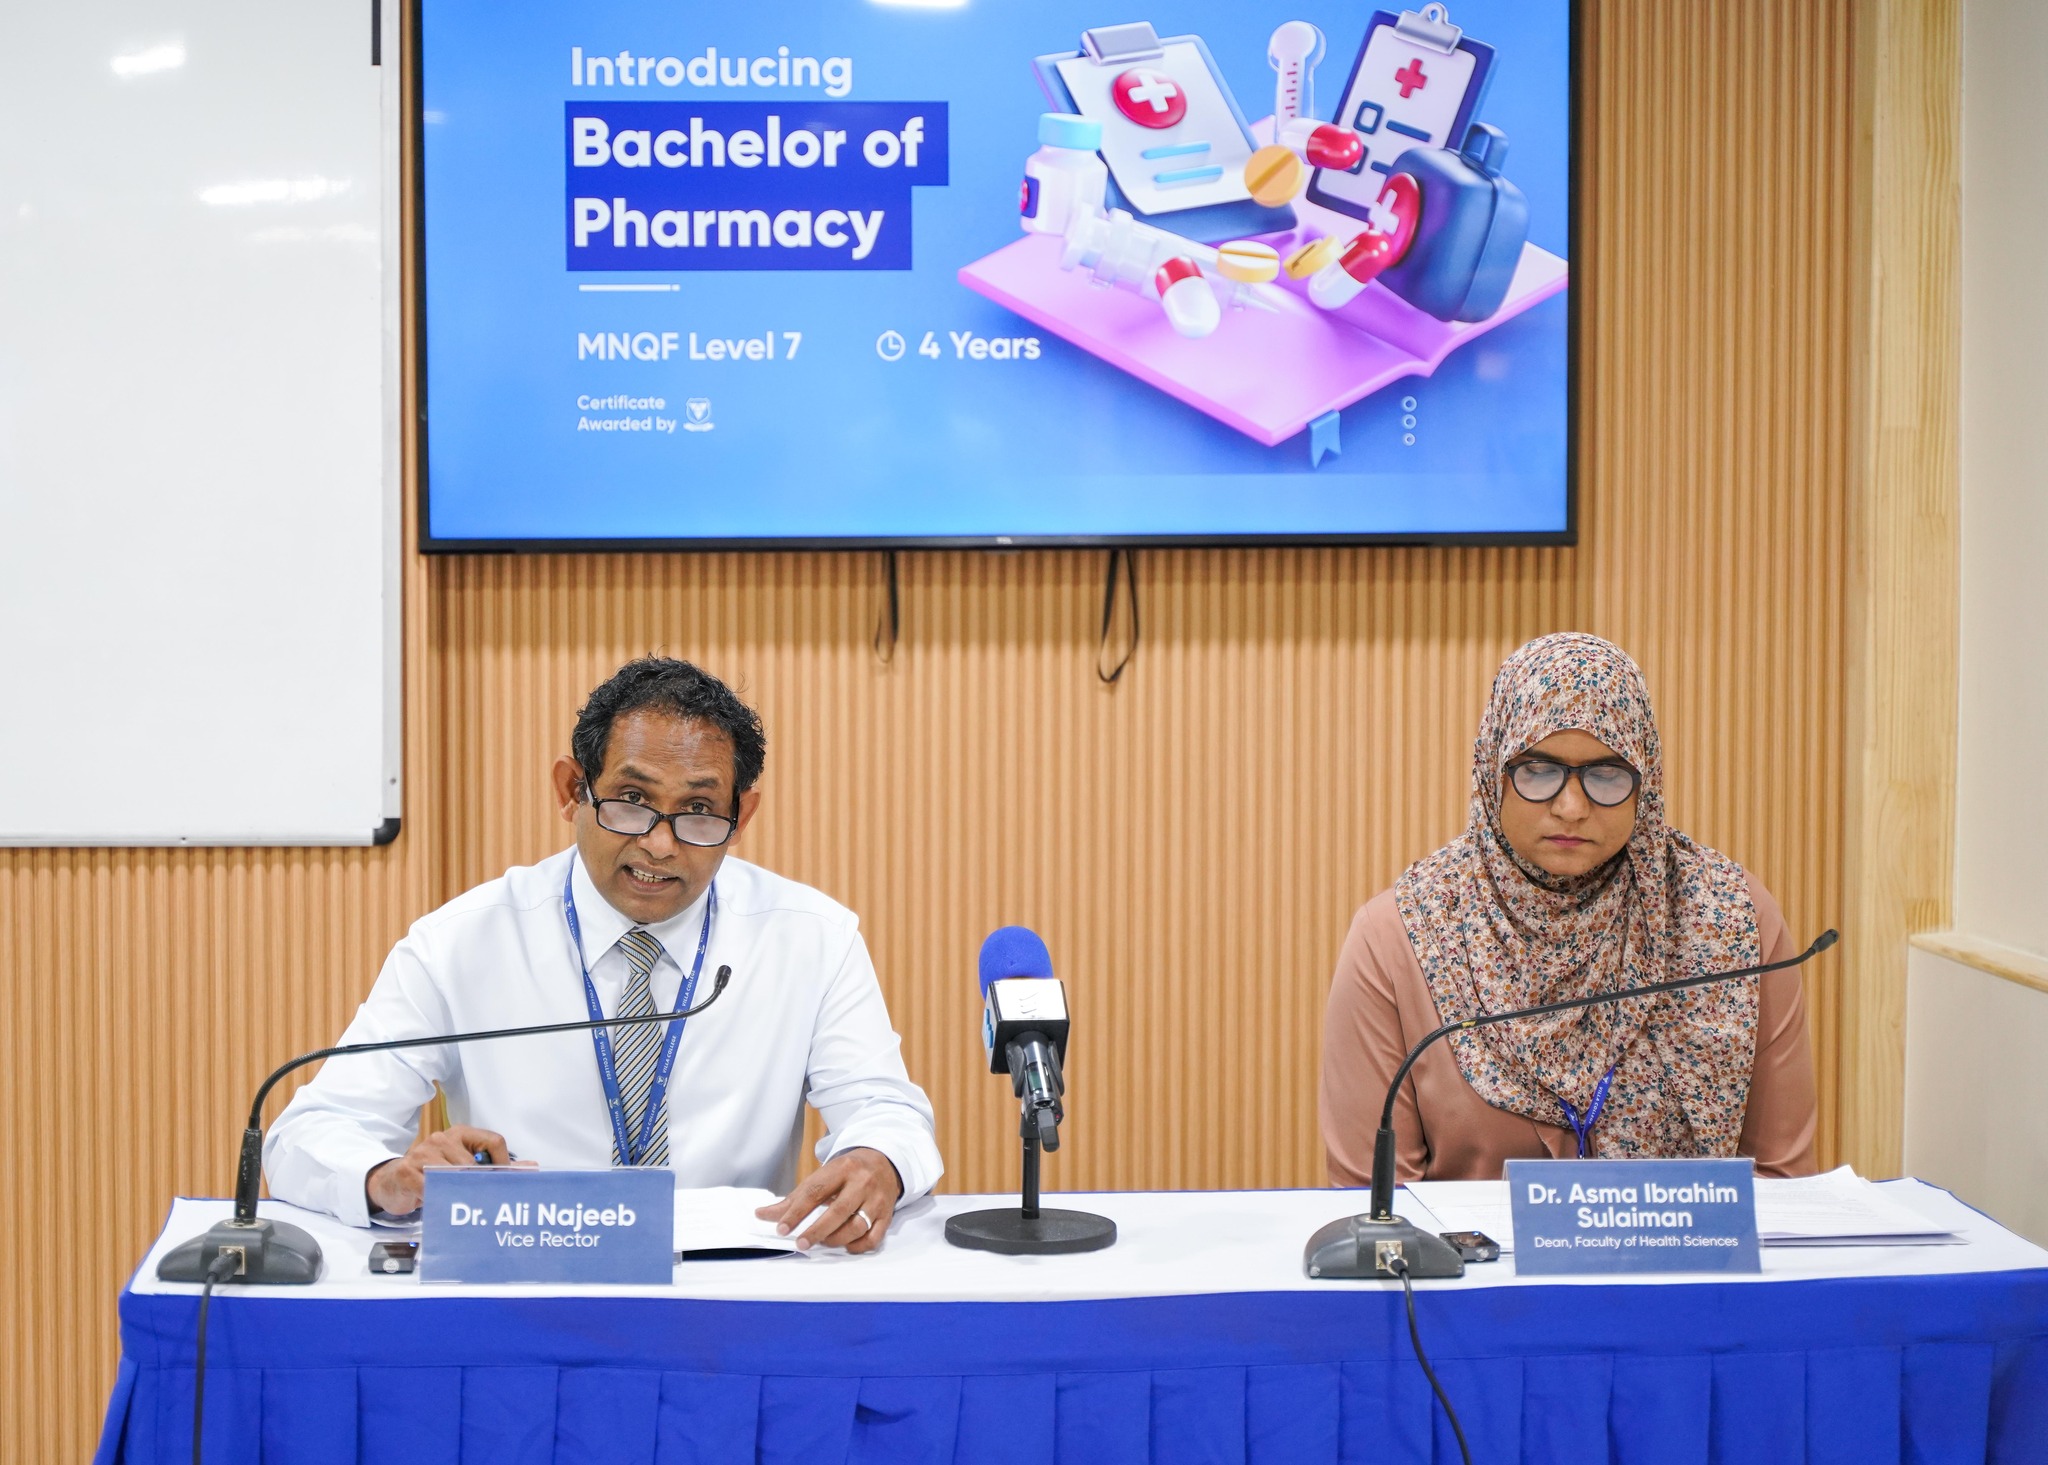 VILLA COLLEGE OPENS APPLICATIONS FOR BACHELOR OF PHARMACY PROGRAMME